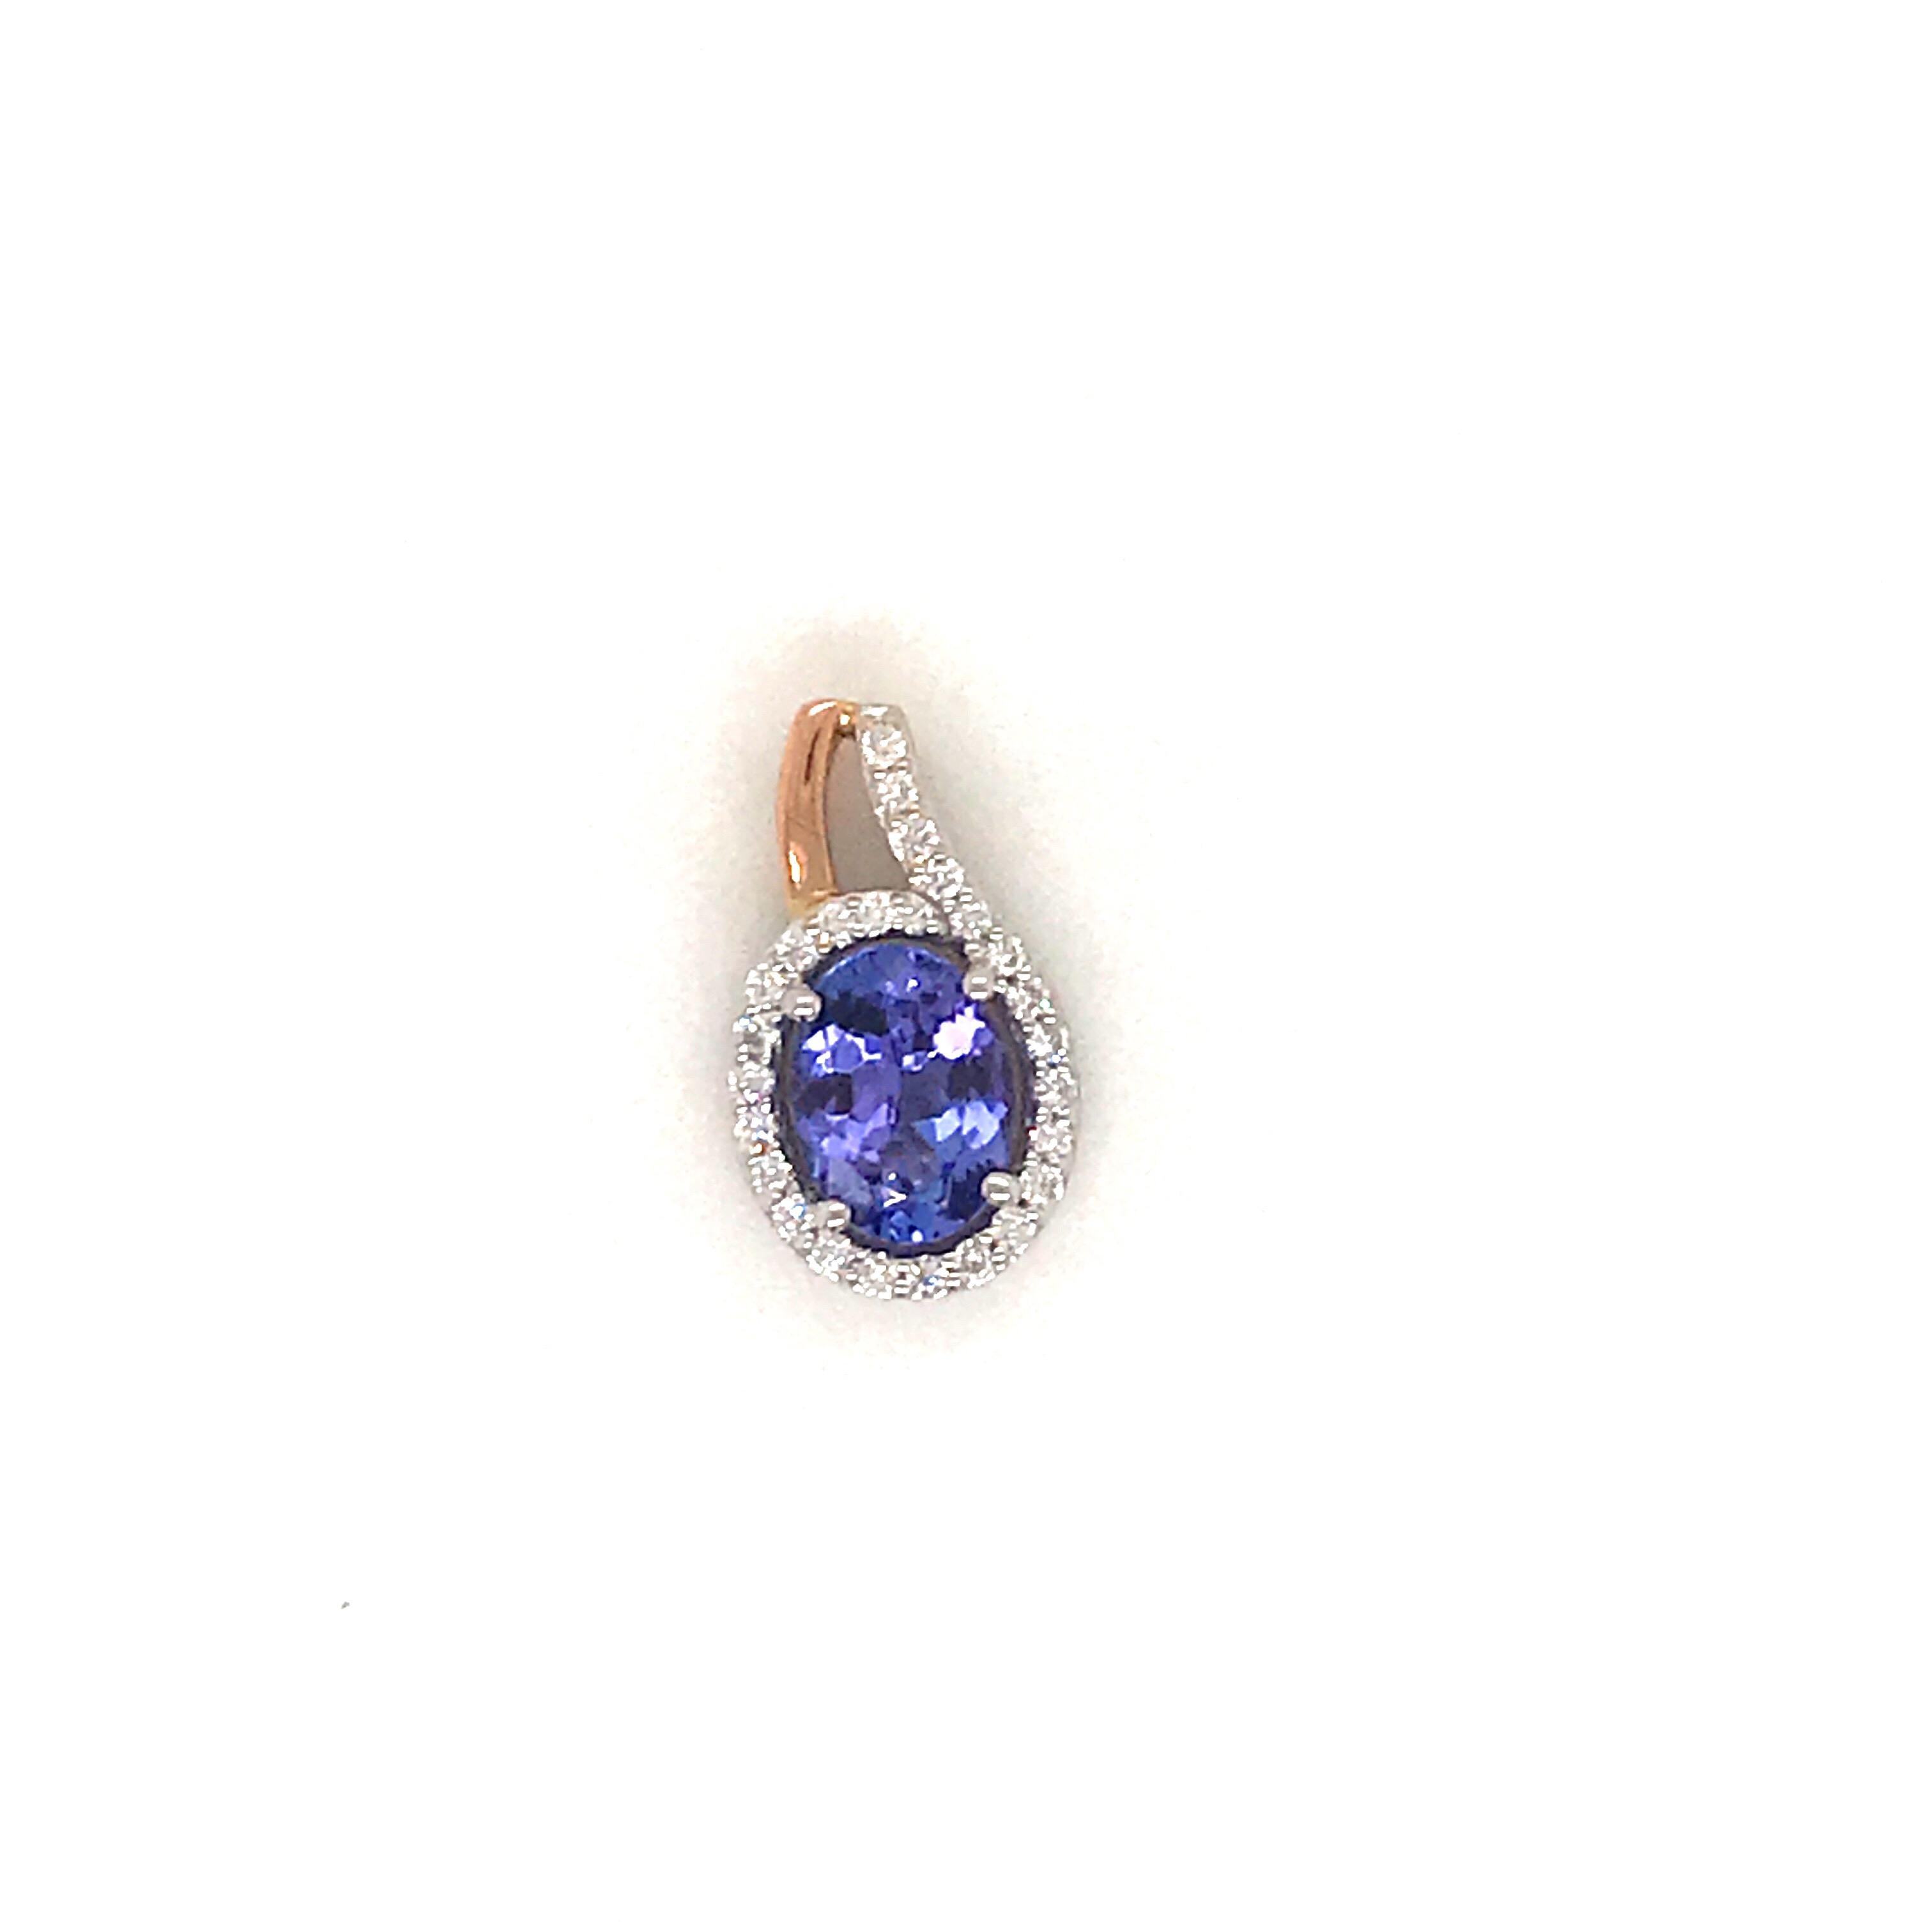 14K White & gold pendant featuring one oval cut Tanzanite weighing 1.30 carats flanked with round brilliants weighing 0.19 carats. Comes with a 16 inch white gold chain. 
Color G
Clarity VS-SI